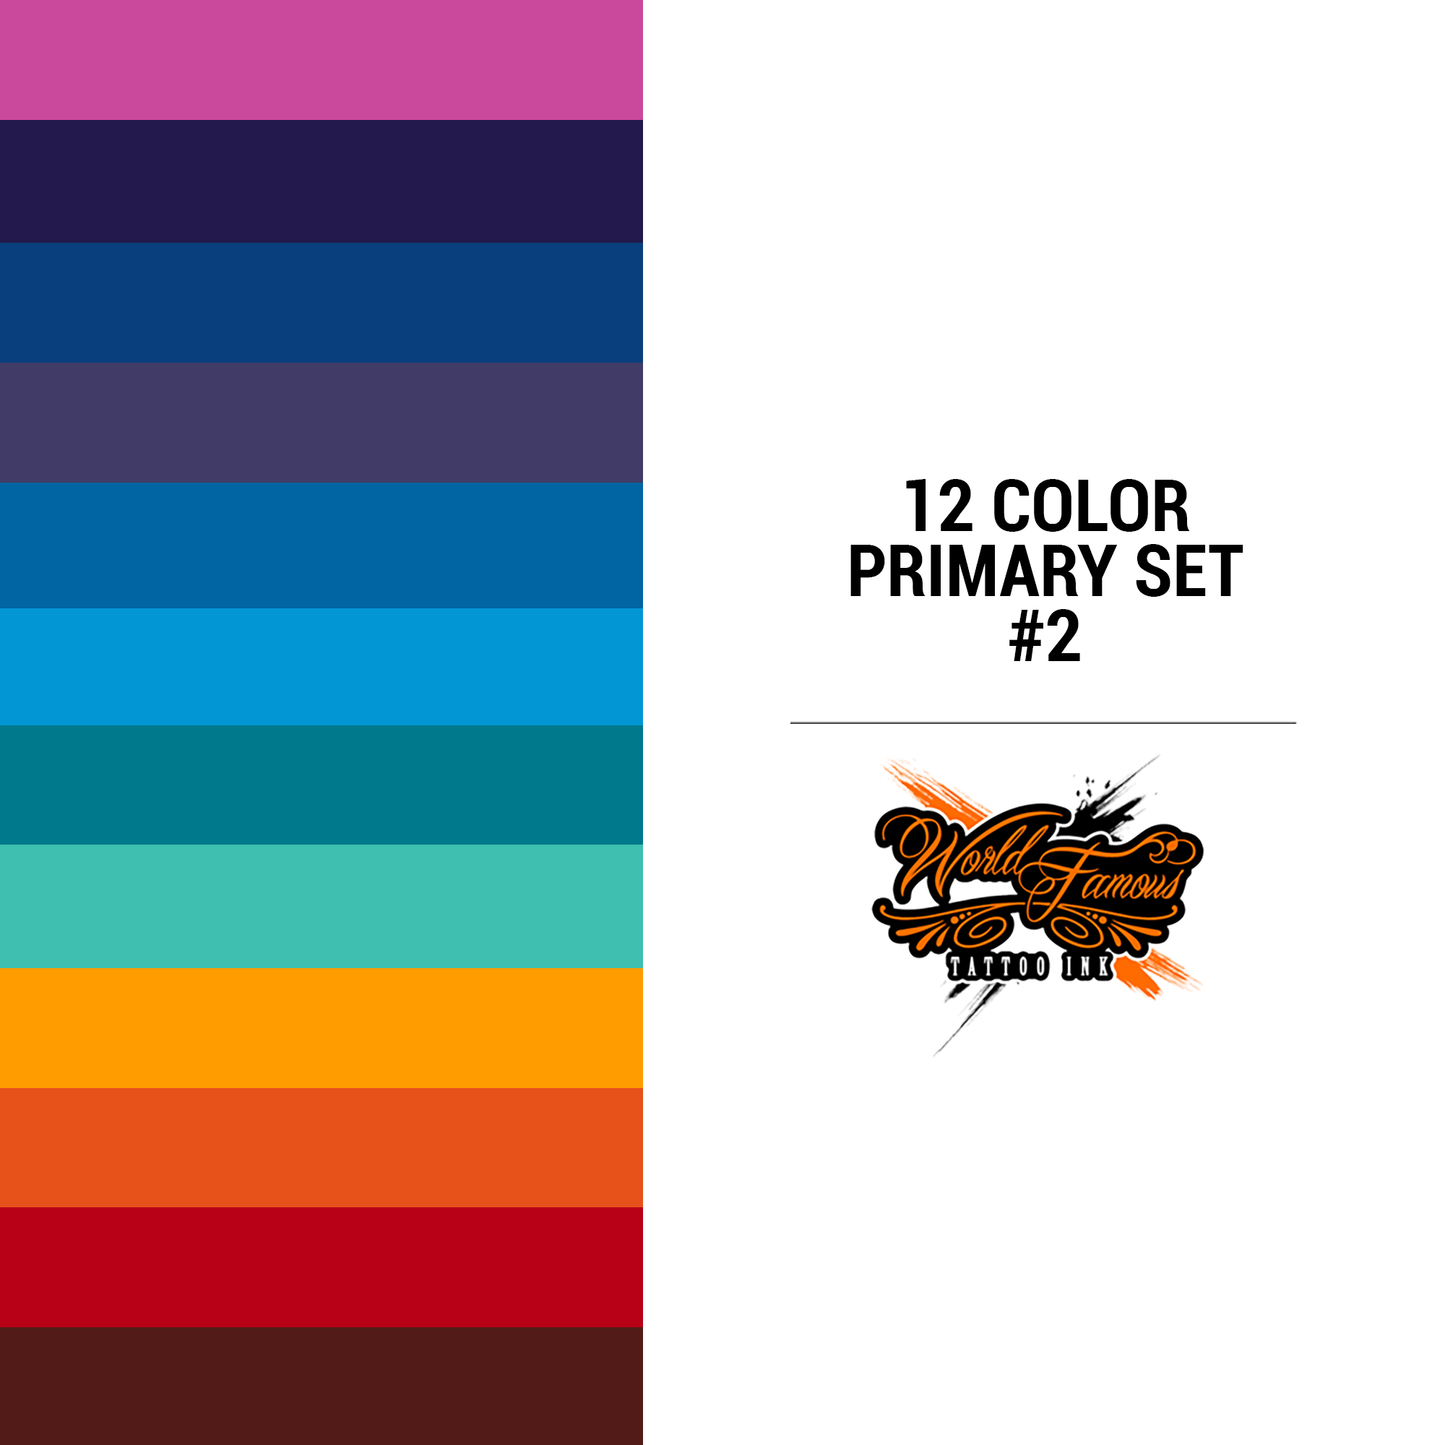 12 Color Primary Set #2 | World Famous Tattoo Ink